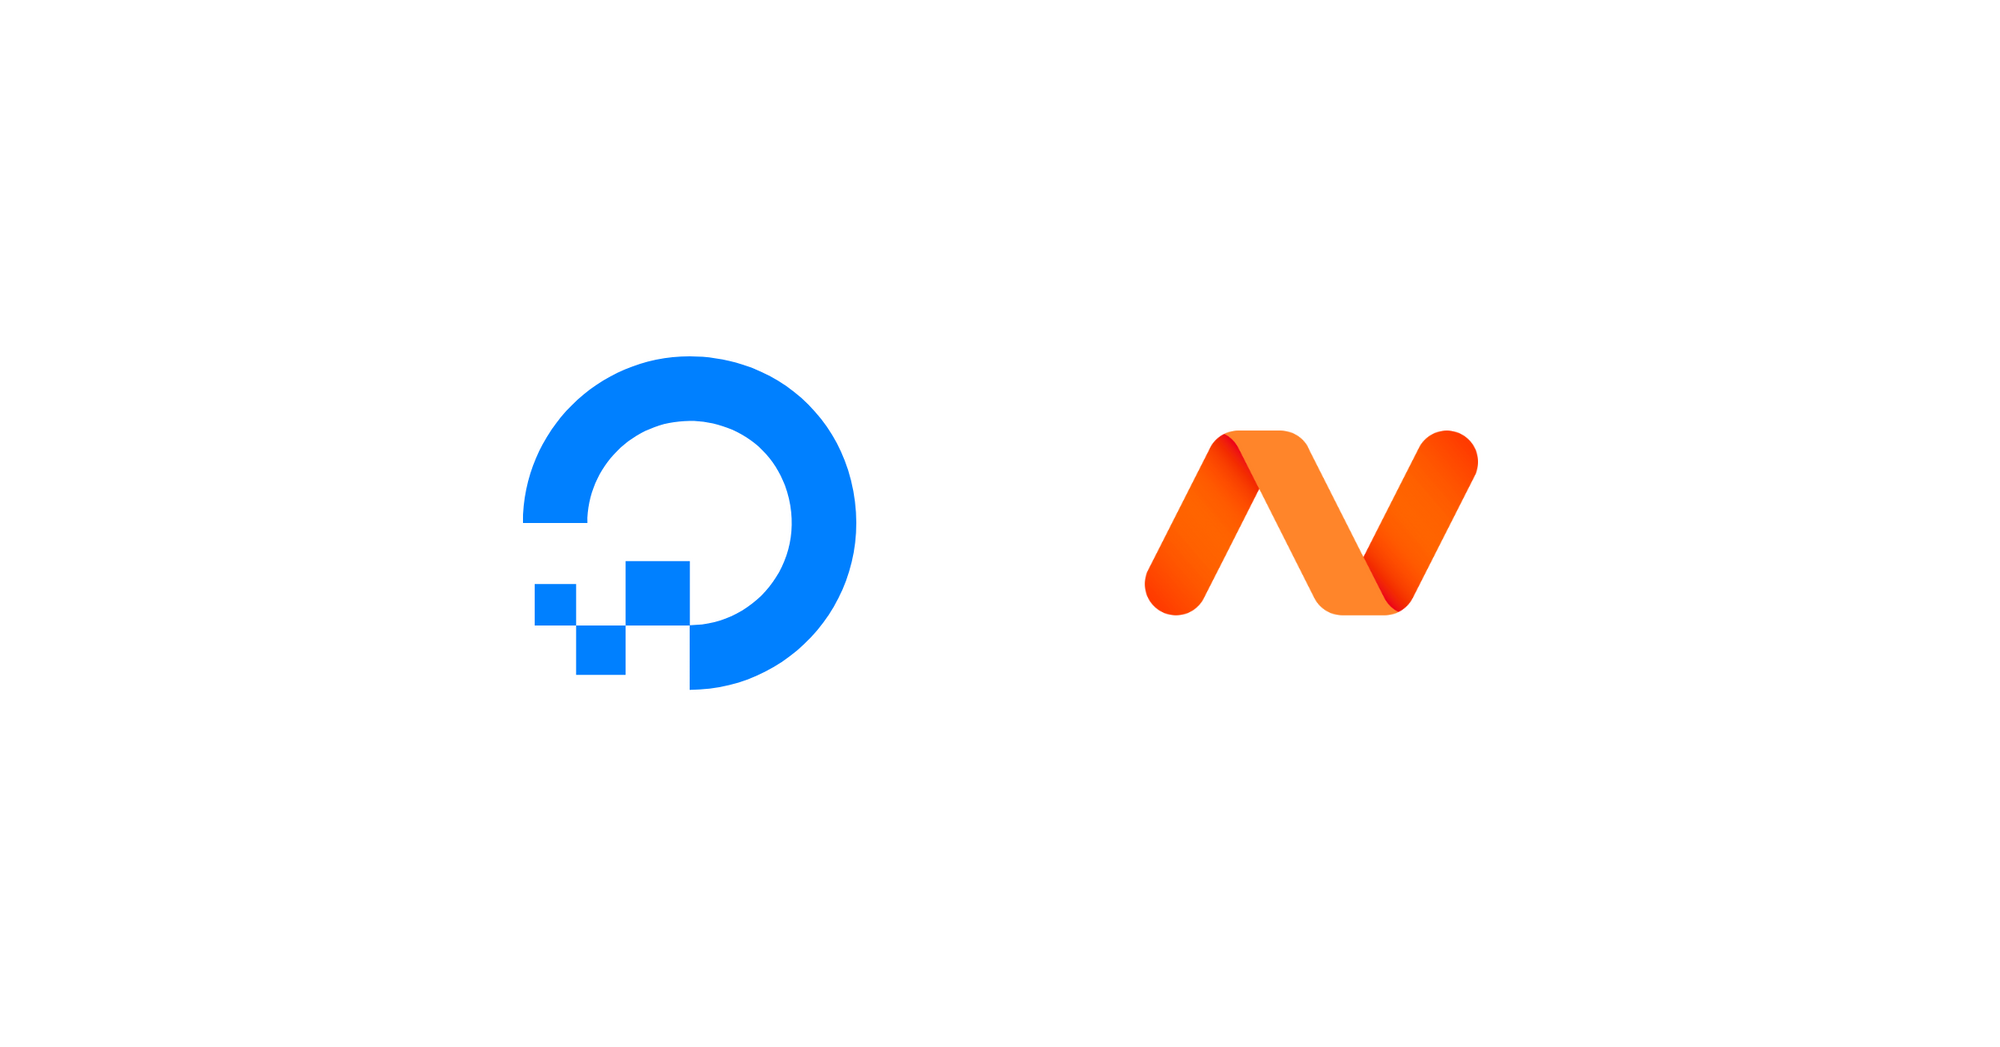 How to connect a Namecheap domain with DigitalOcean